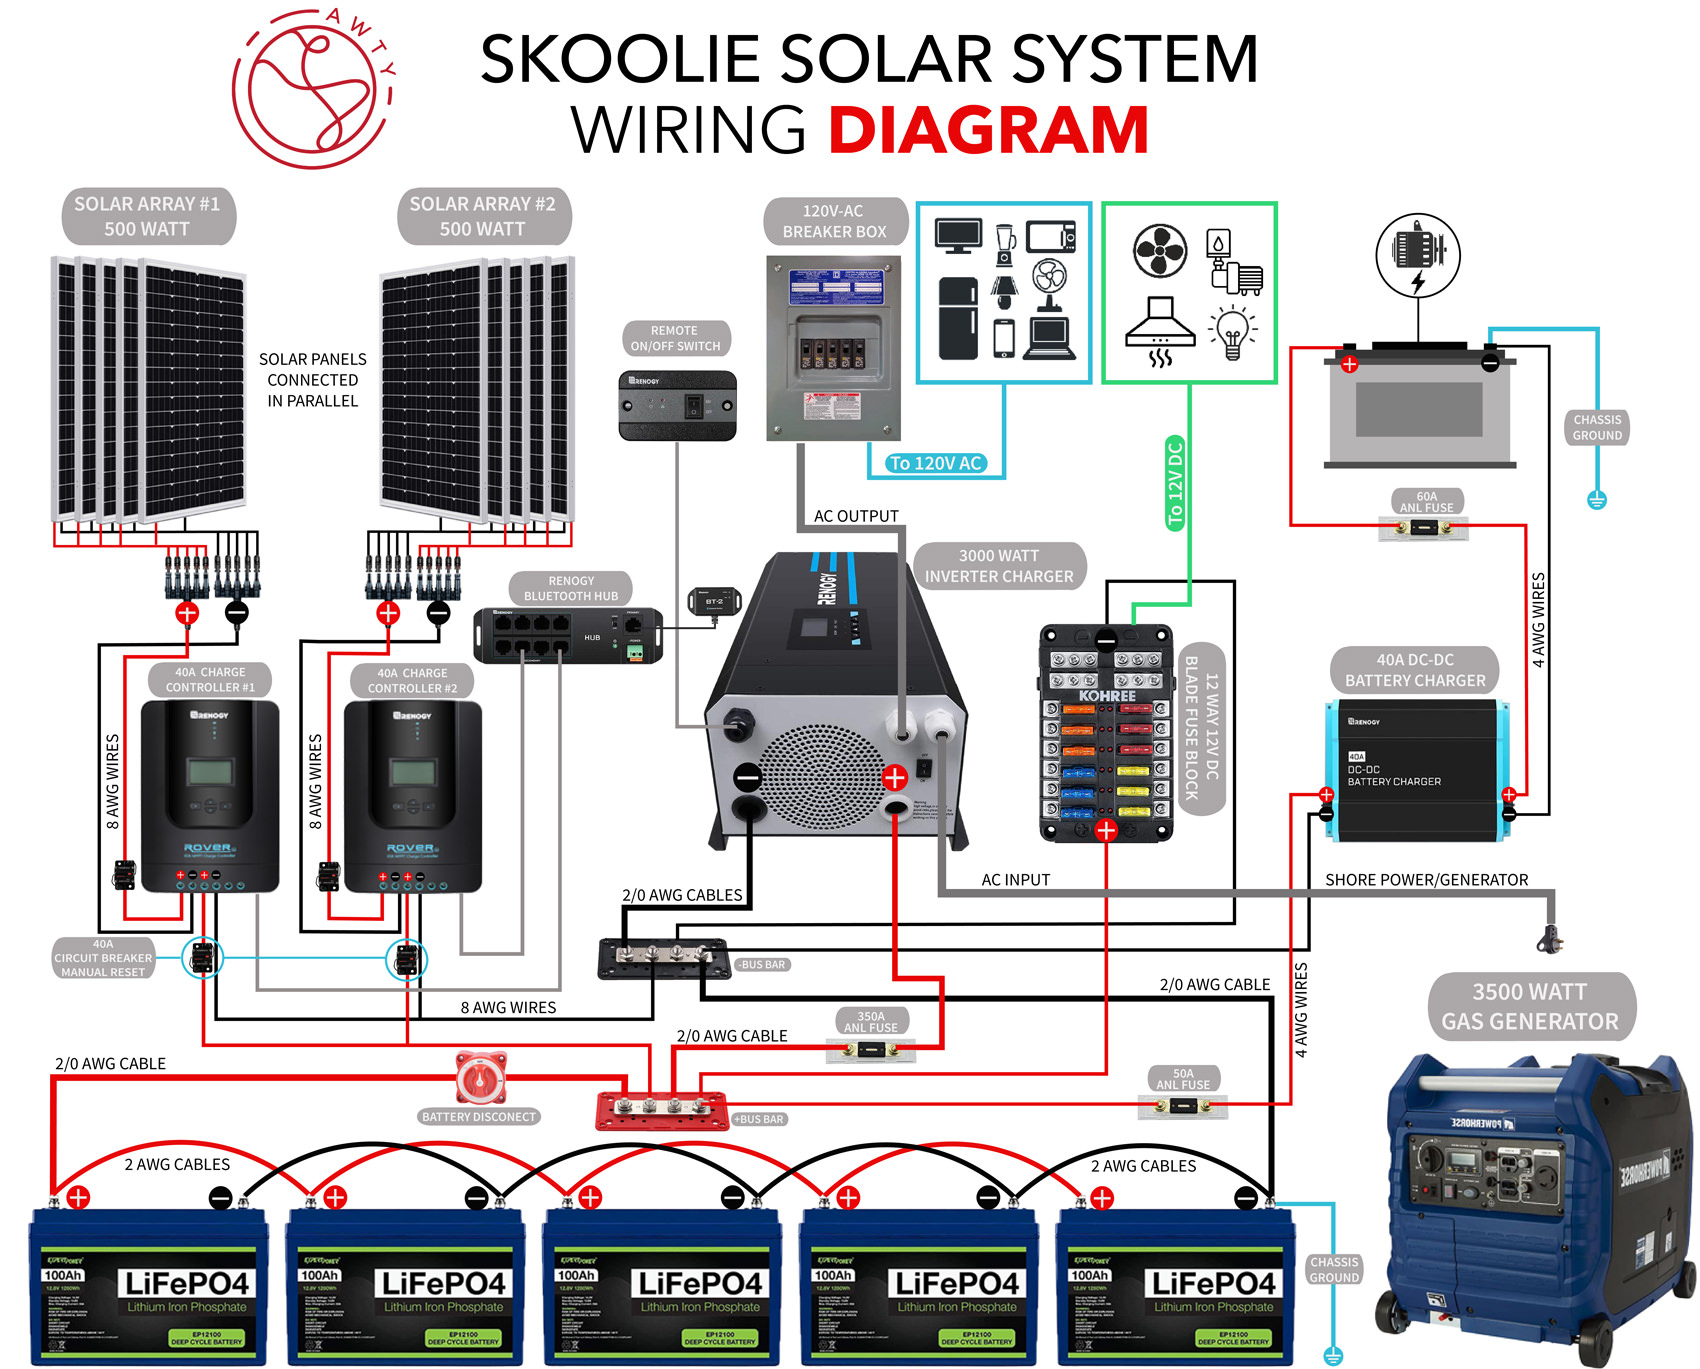 How to Set Up & Wire a Skoolie Solar System StepbyStep Guide